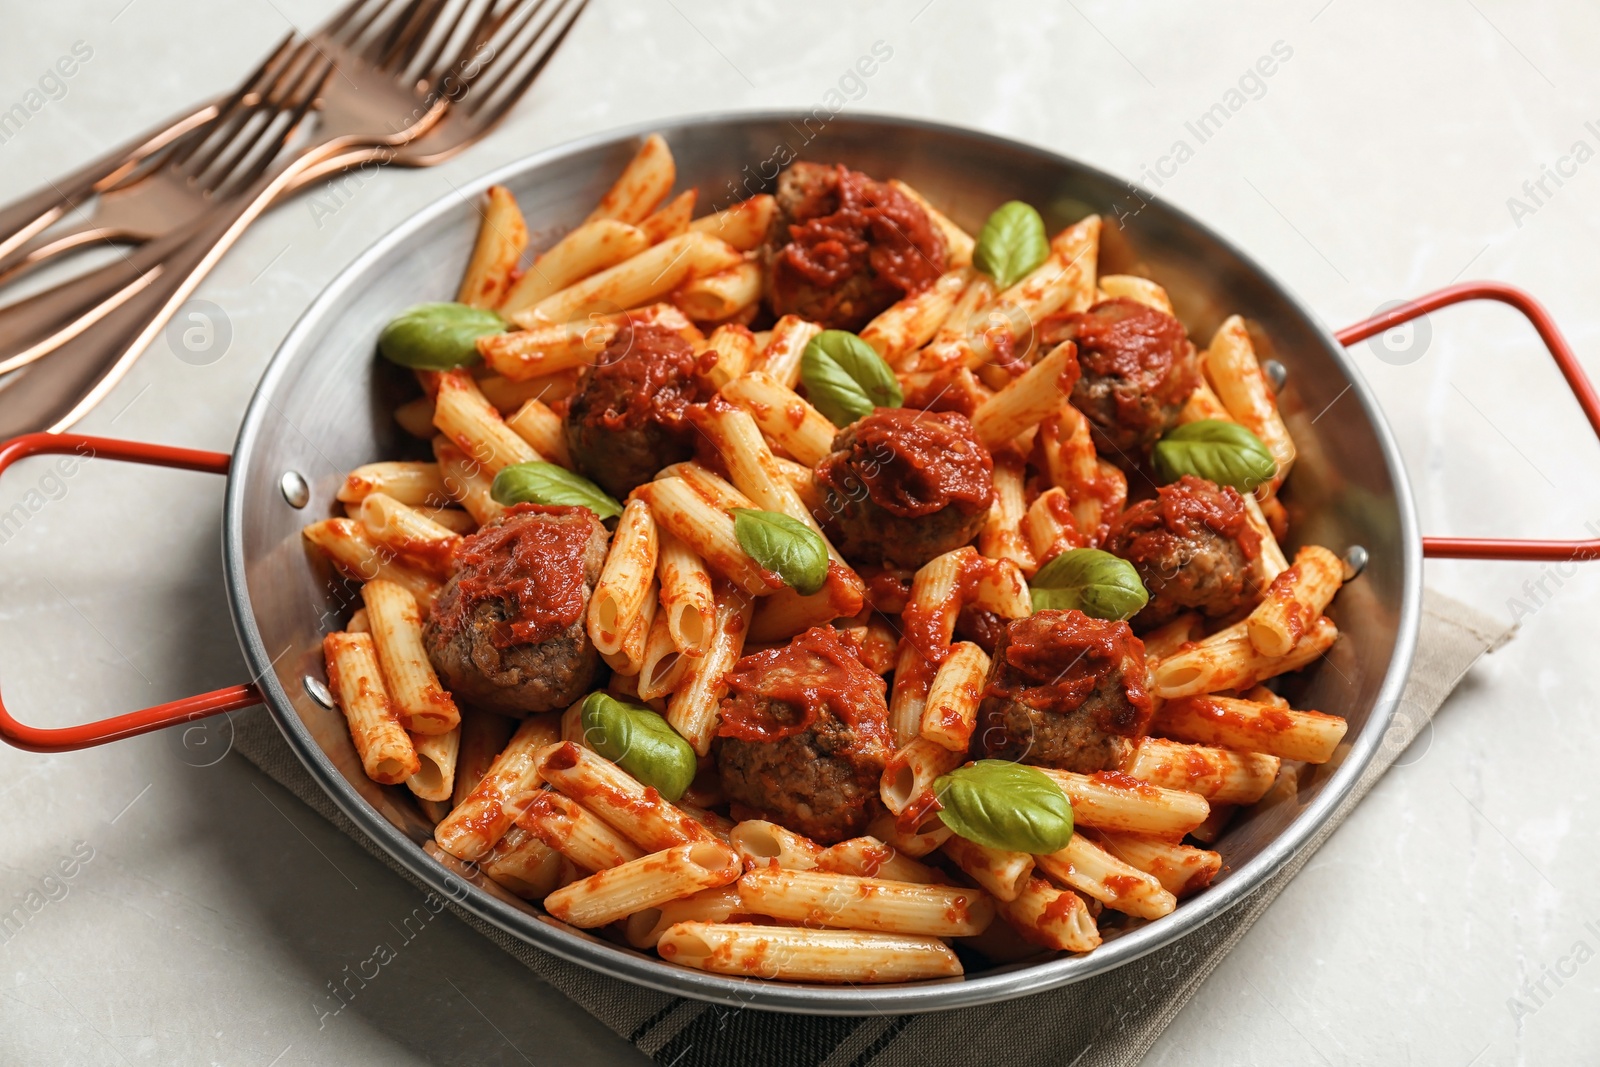 Photo of Delicious pasta with meatballs and tomato sauce on grey background